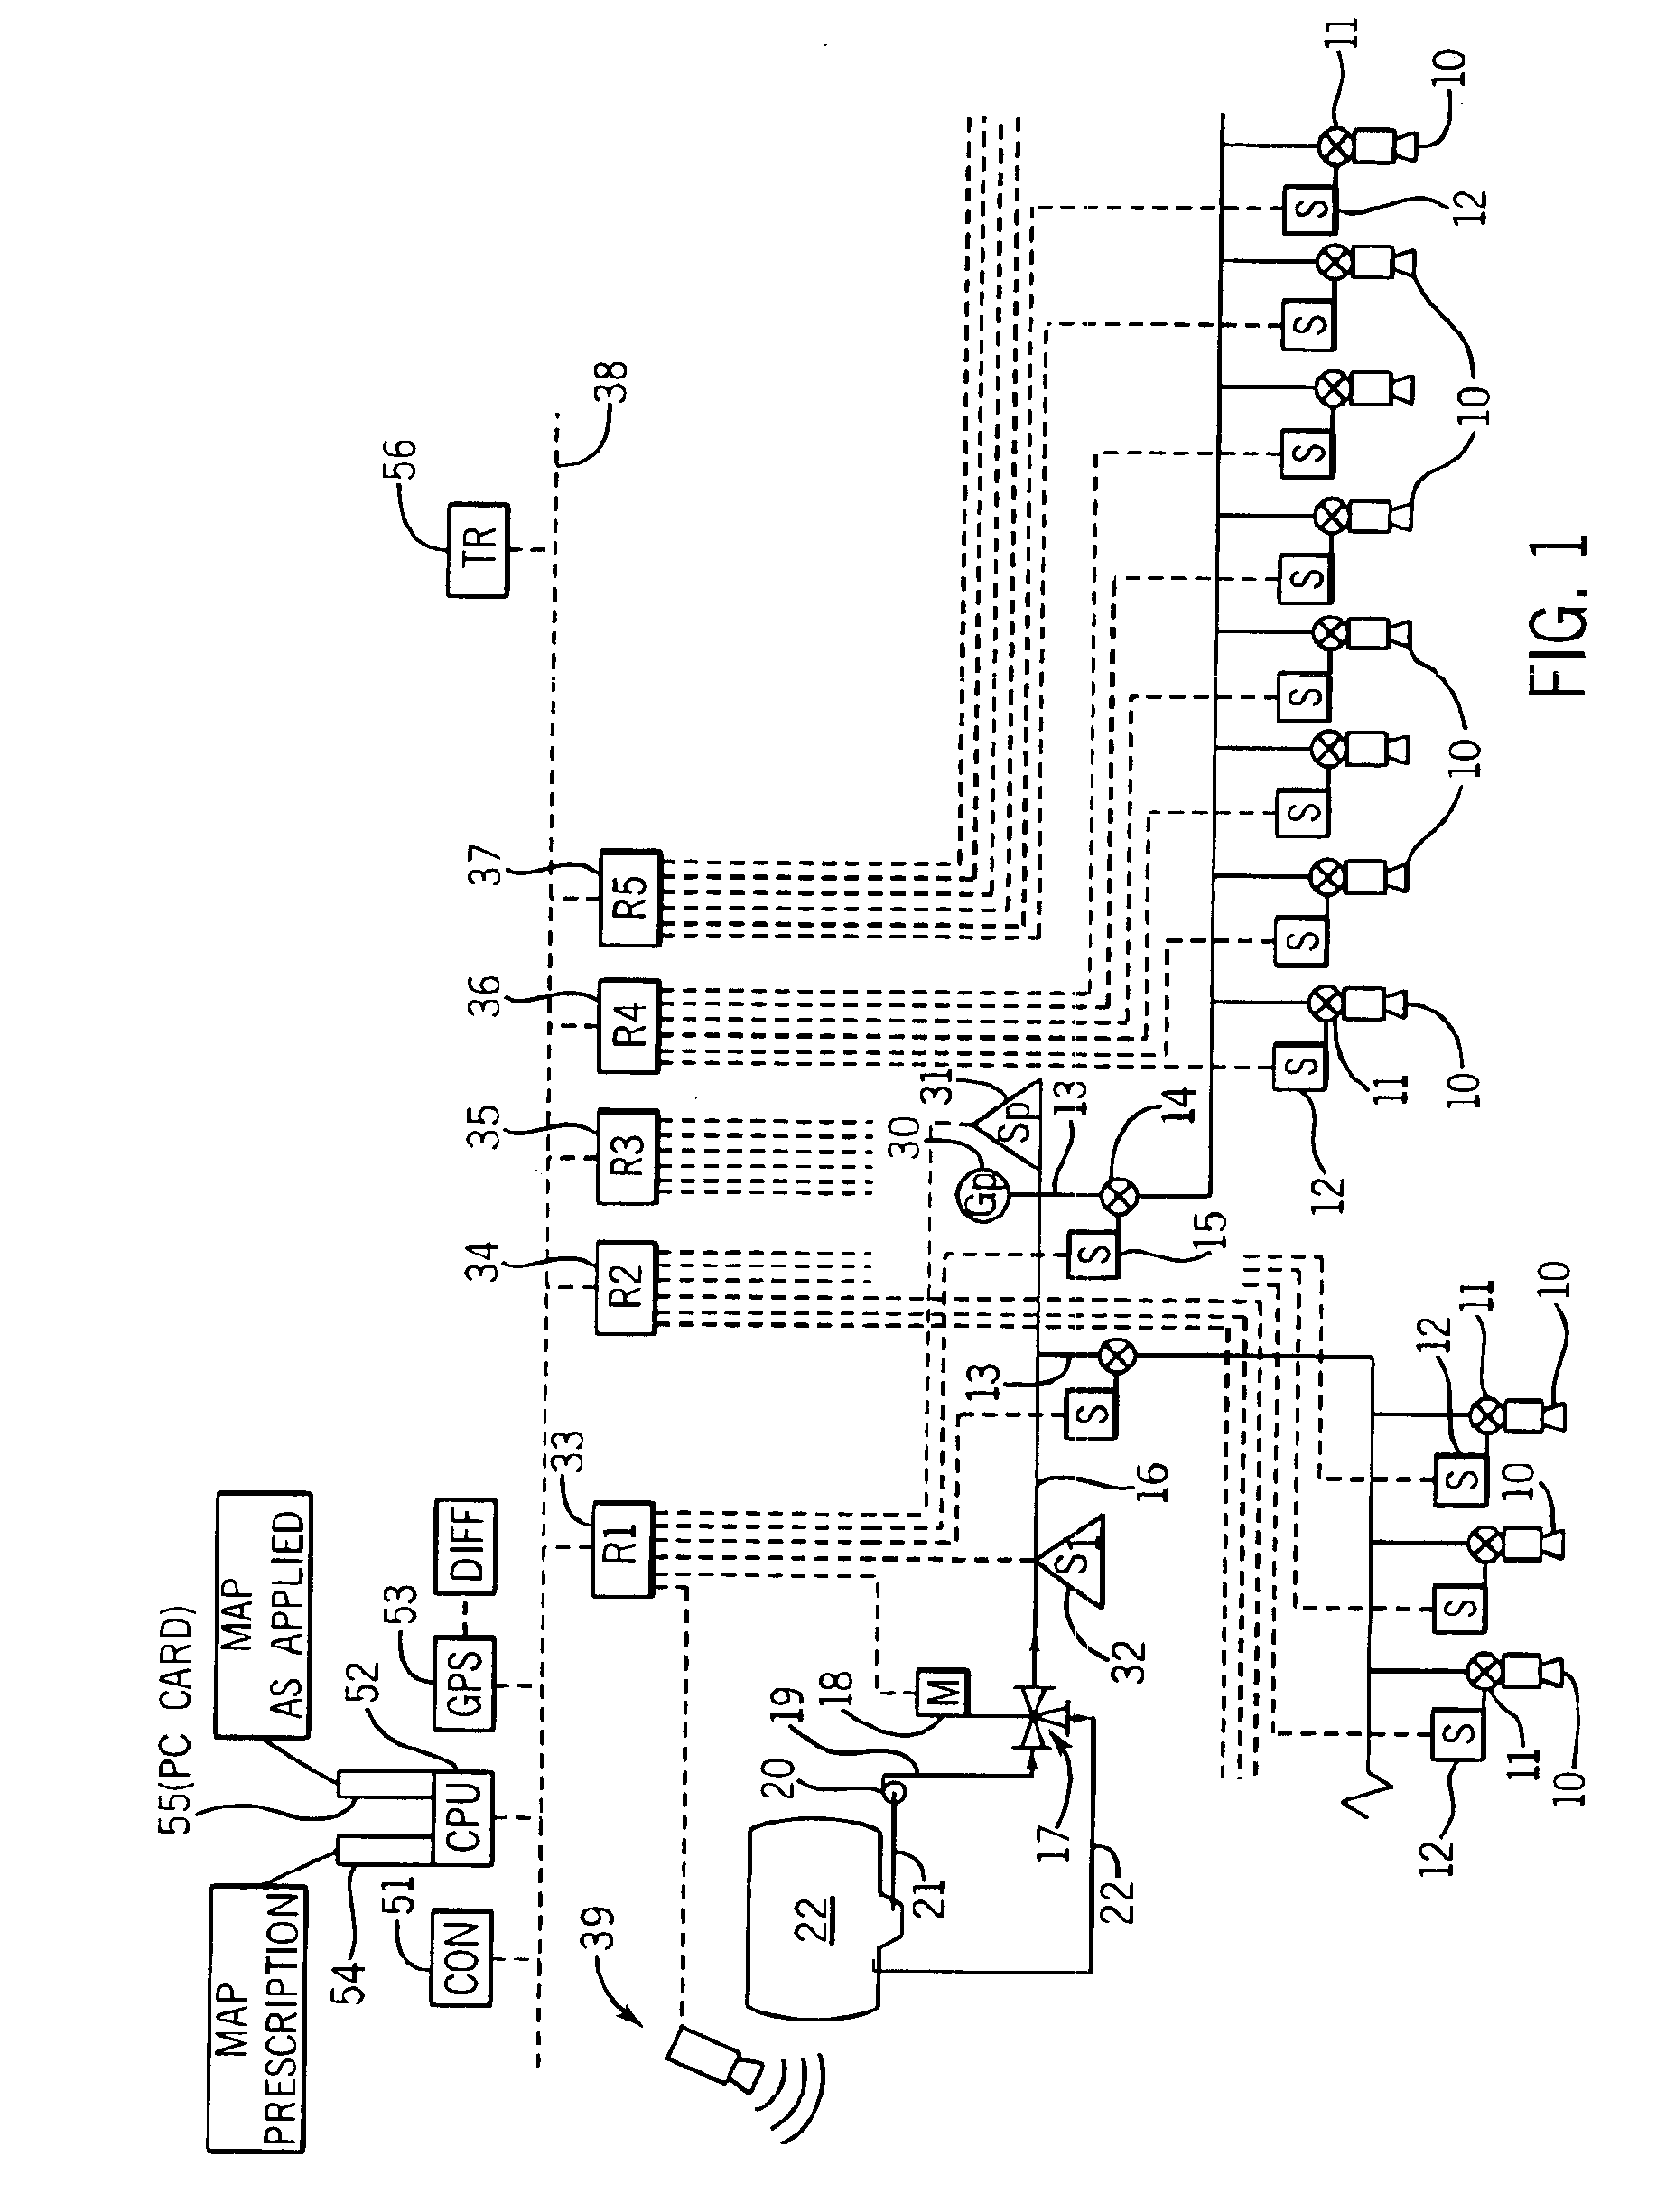 Precision farming system for applying product to a field